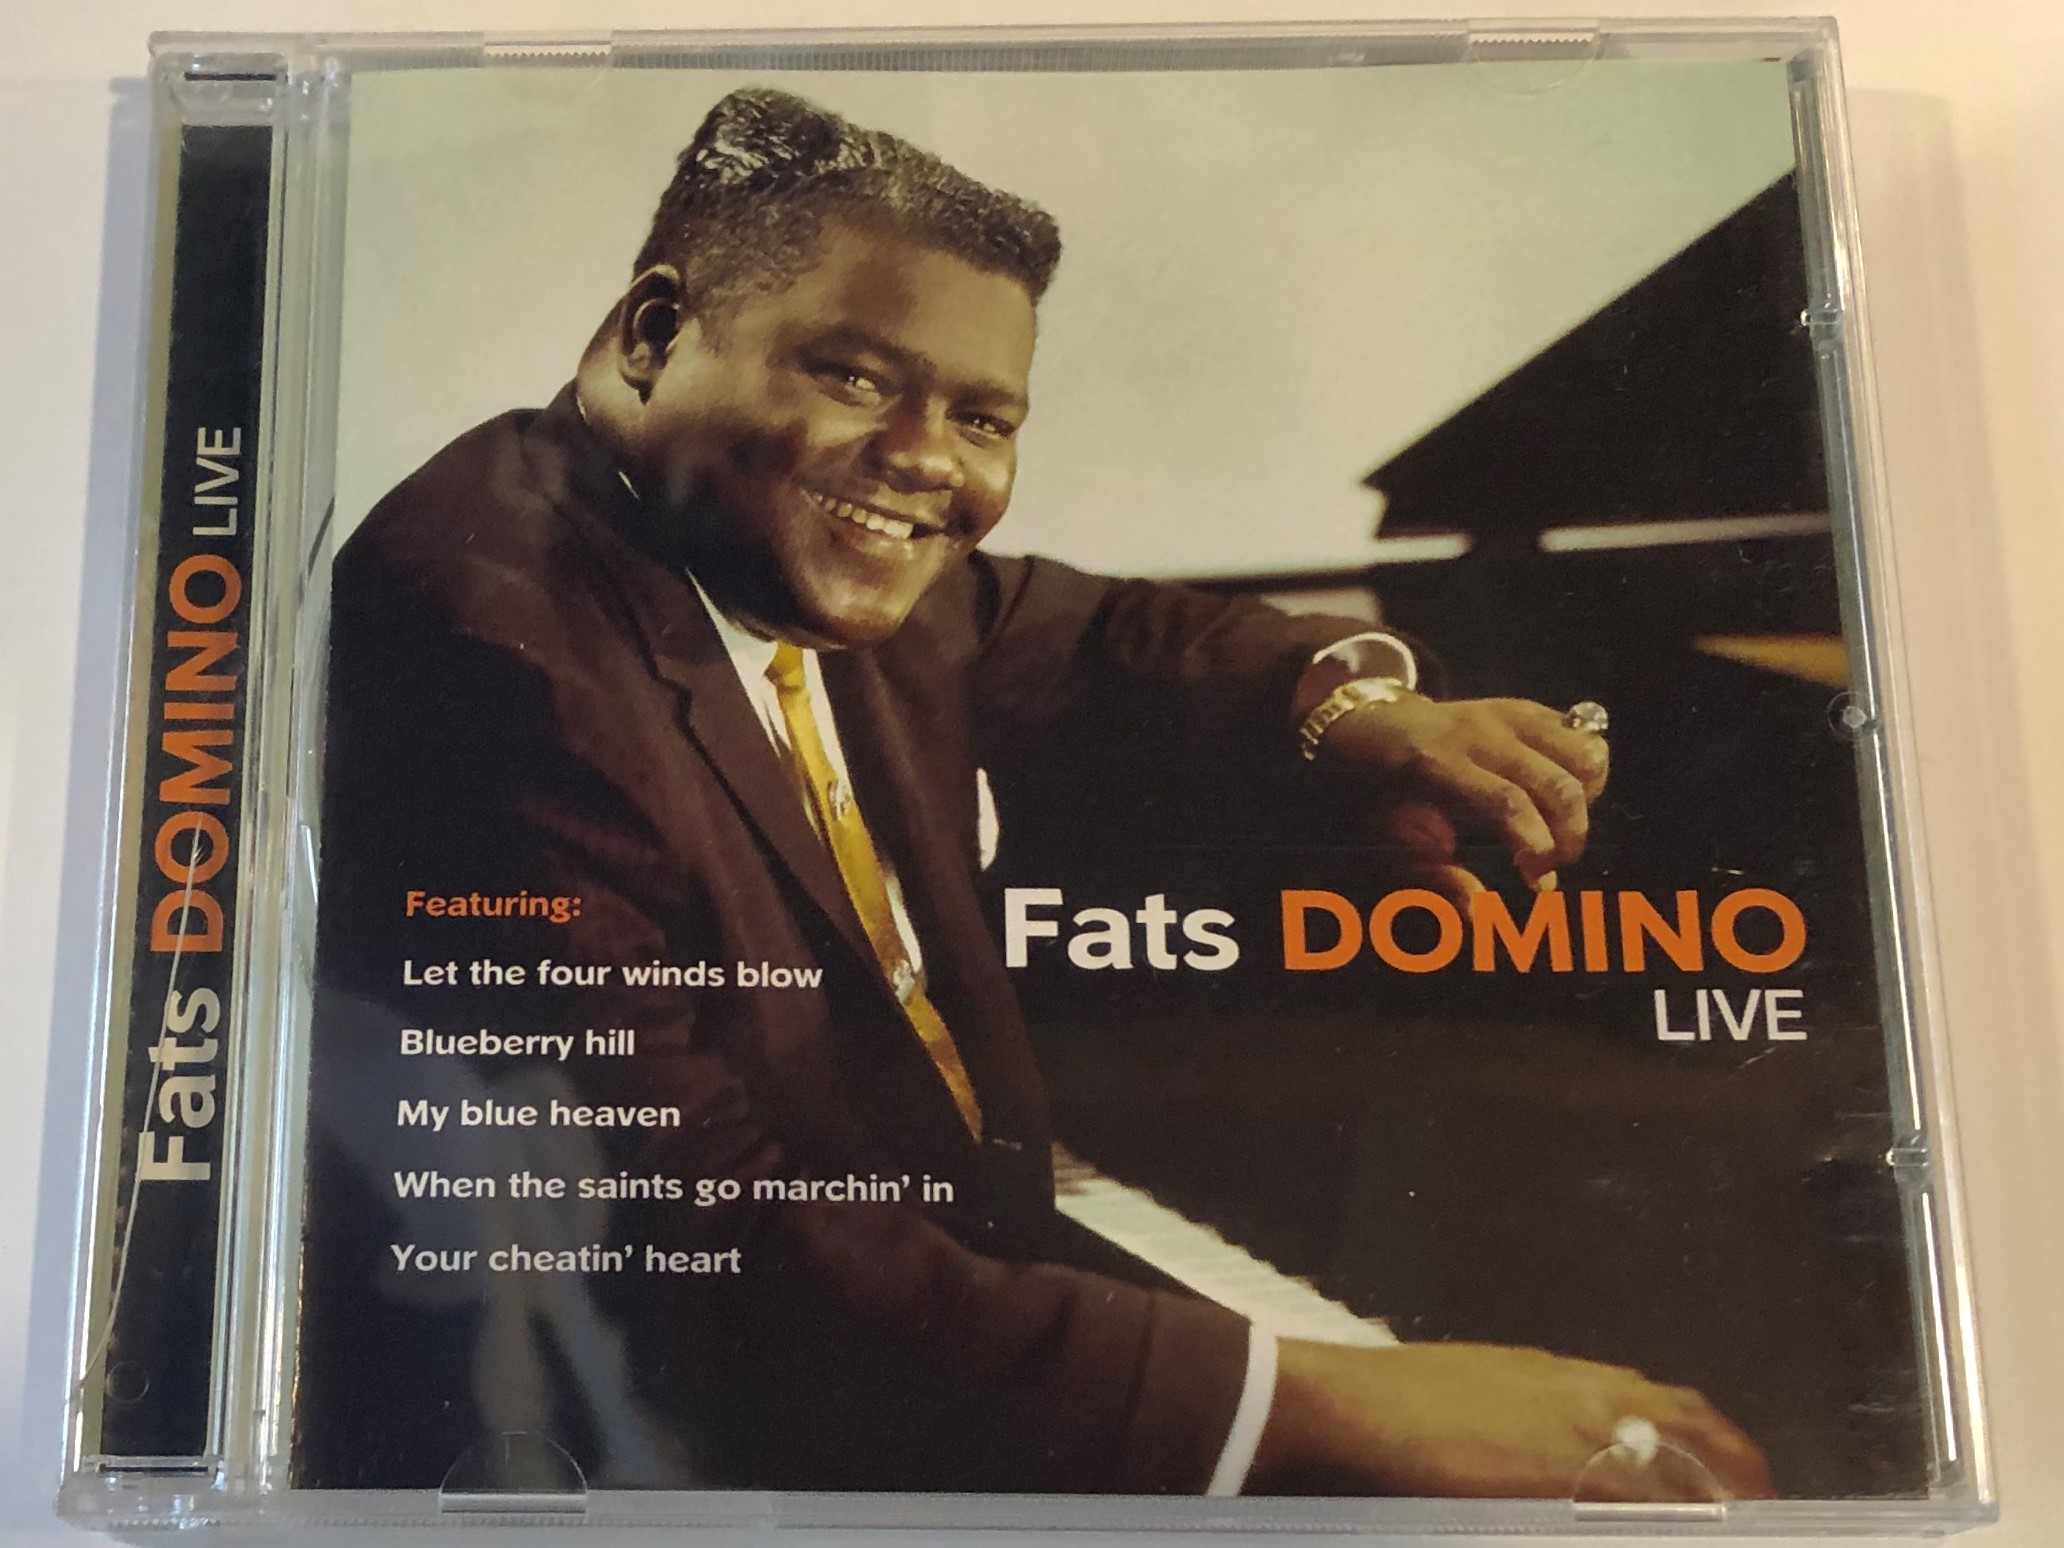 fats-domino-live-featuring-let-the-four-winds-blow-blueberry-hill-my-blue-heaven-when-the-saints-go-marchin-in-your-cheatin-heart-play-24-7-audio-cd-2007-5051503106619-1-.jpg